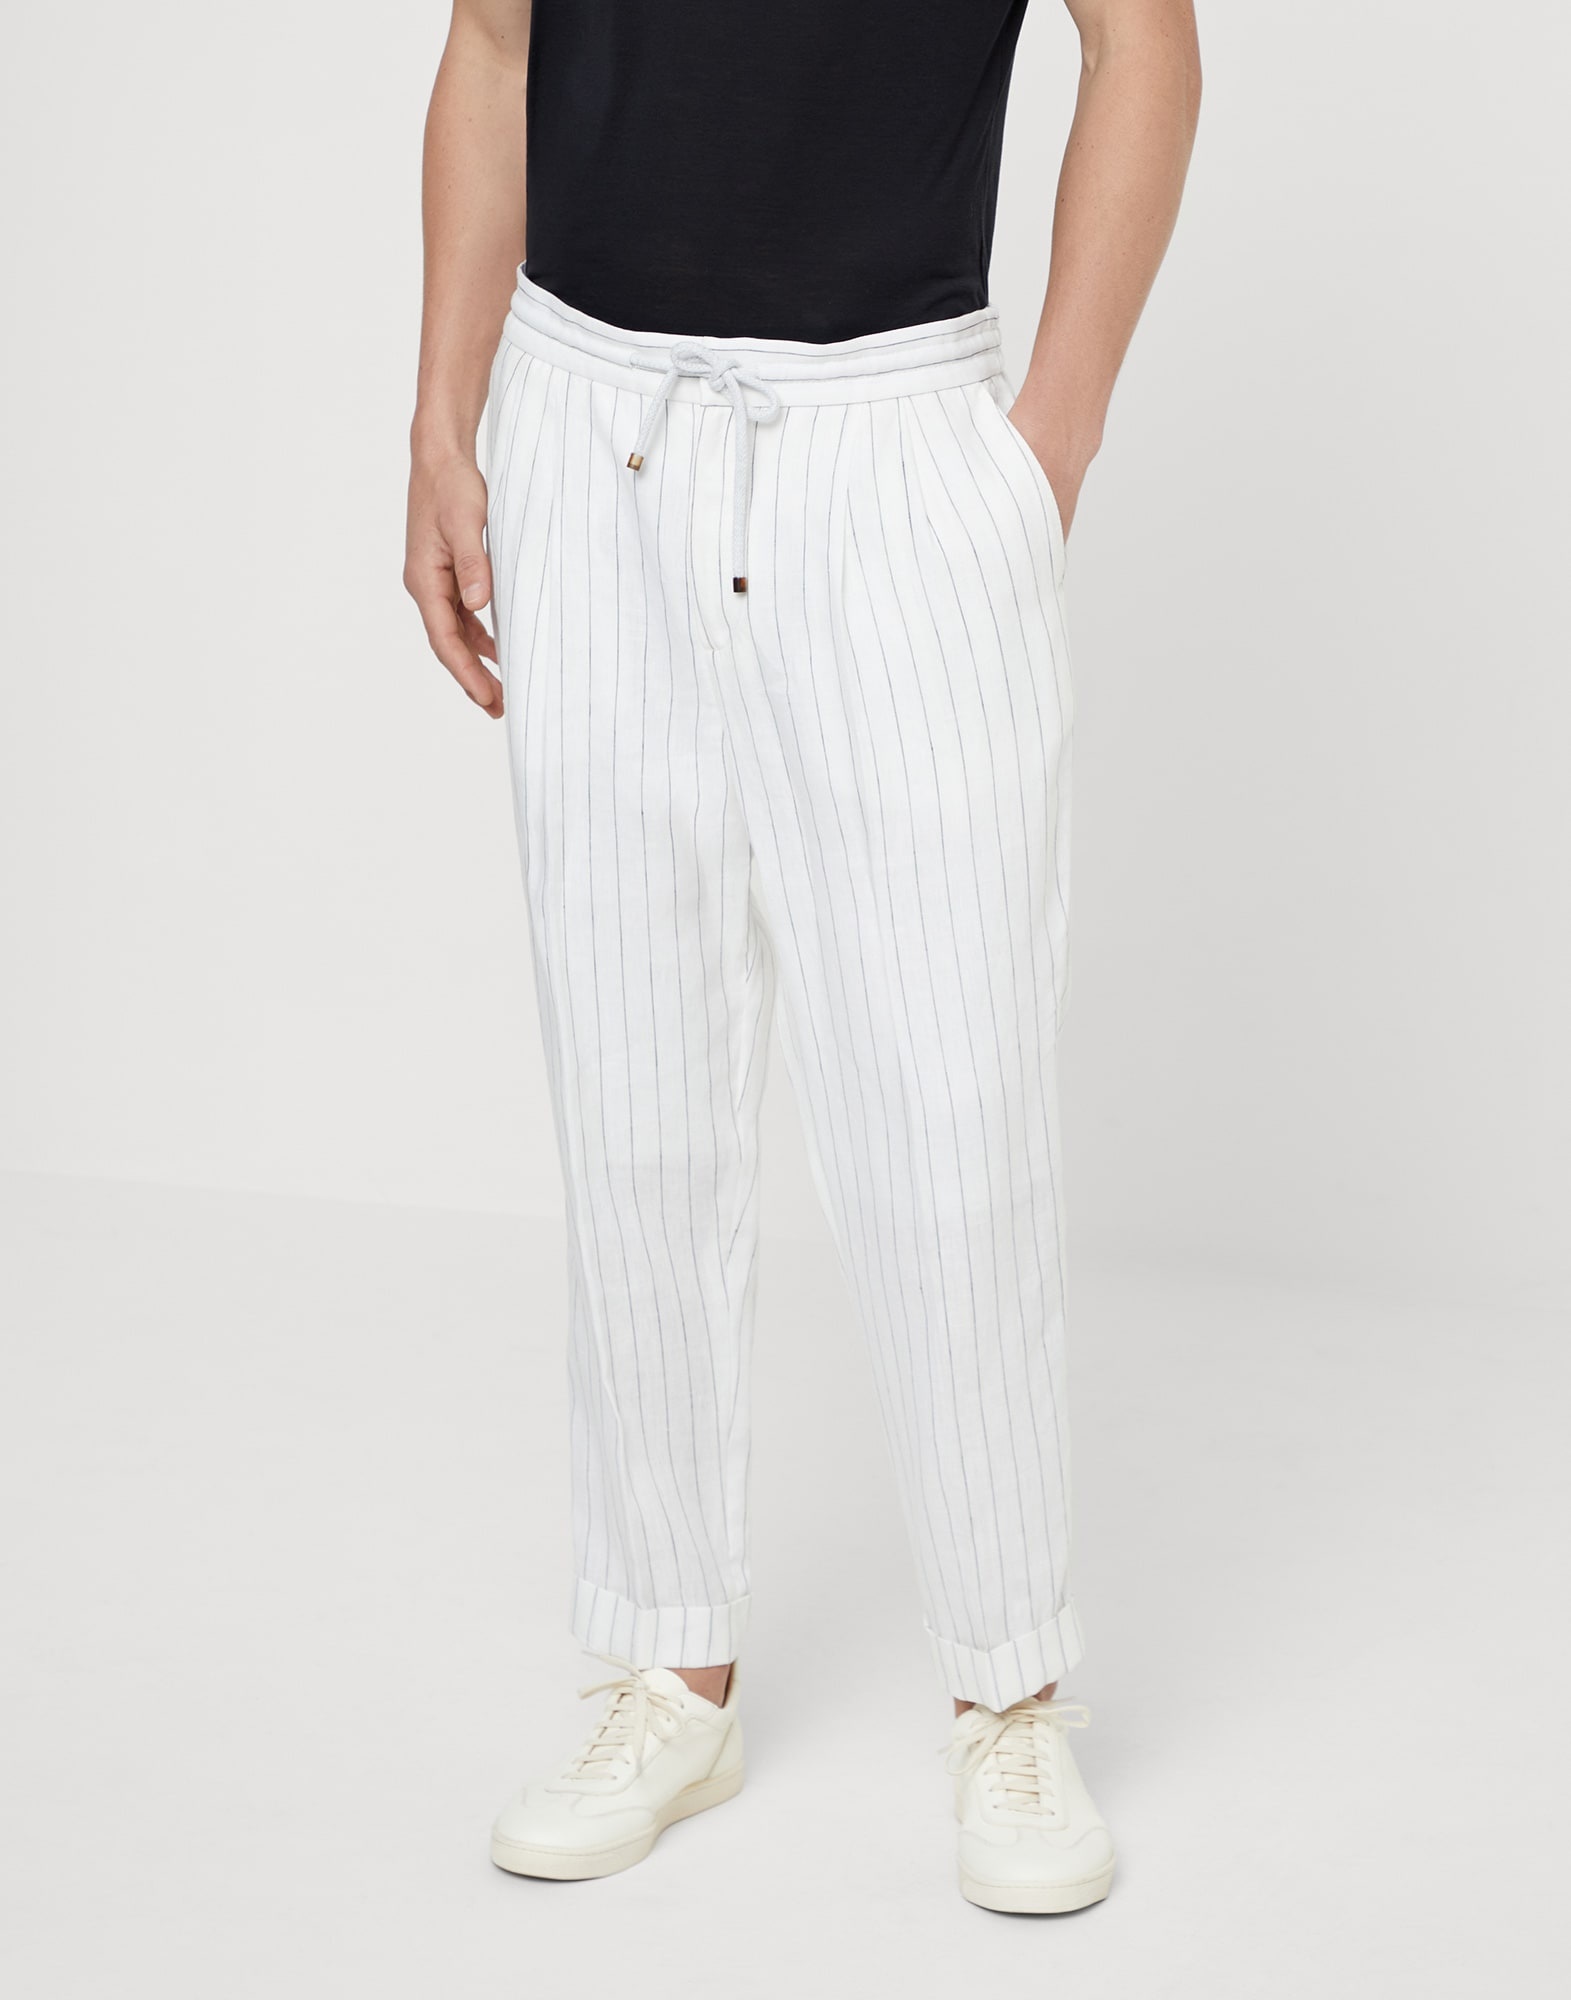 Linen chalk stripe leisure fit trousers with drawstring and double pleats - 1